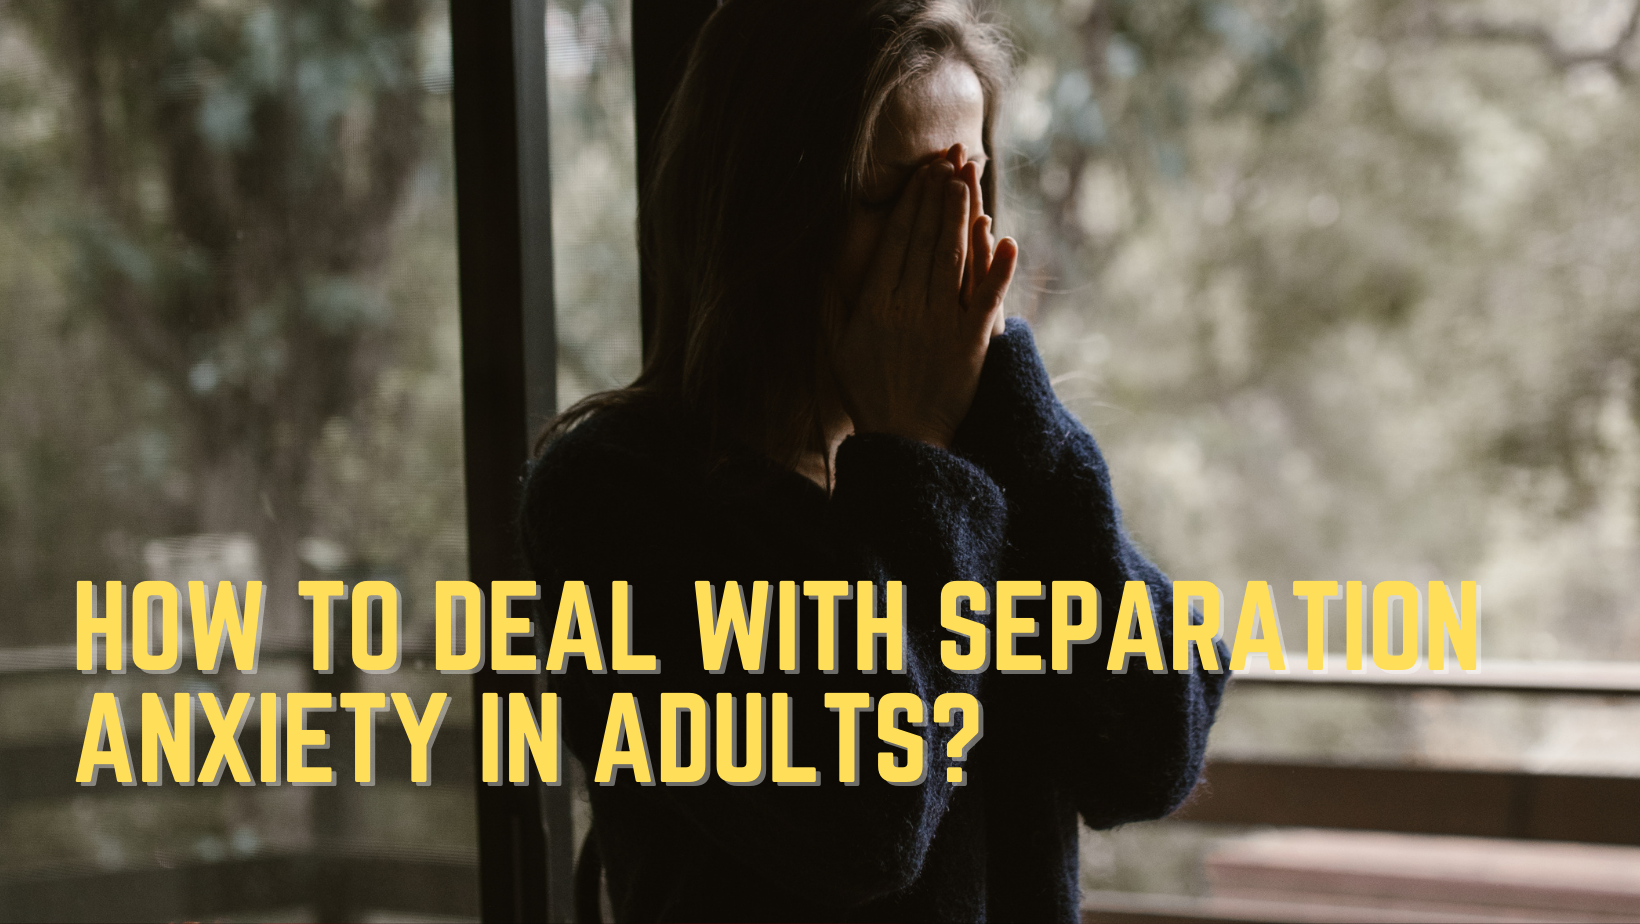 How to deal with Separation Anxiety in Adults?